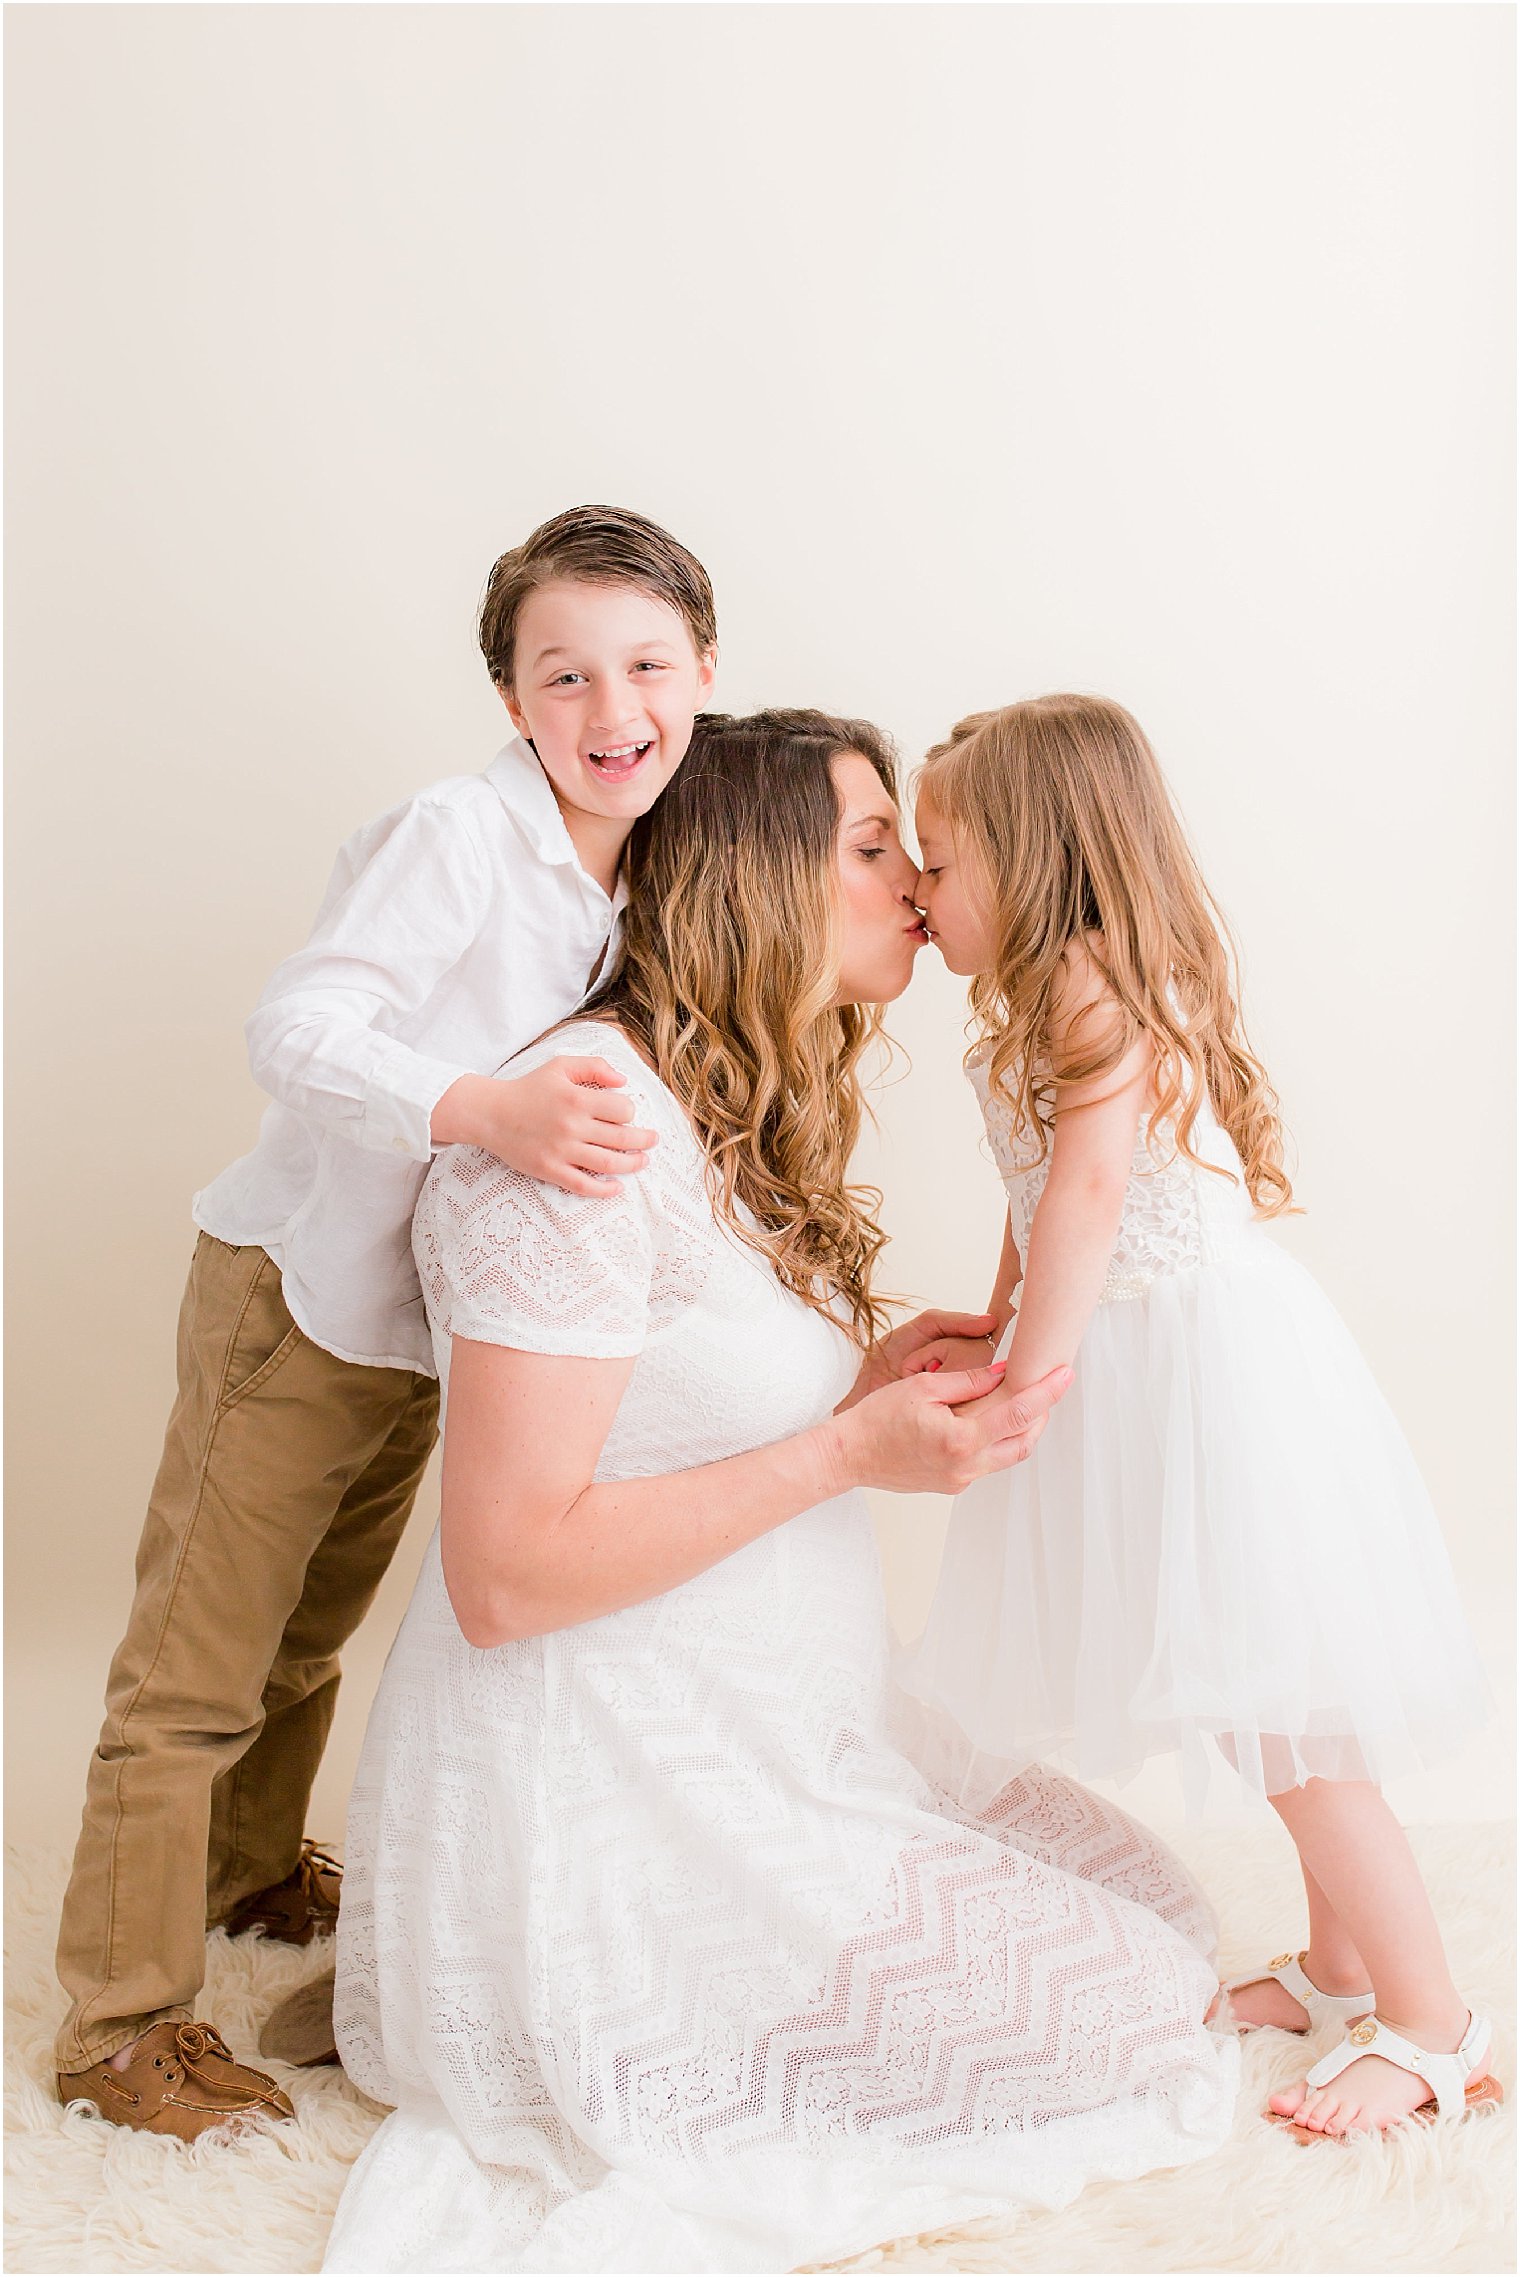 Incorporating family into a studio maternity session